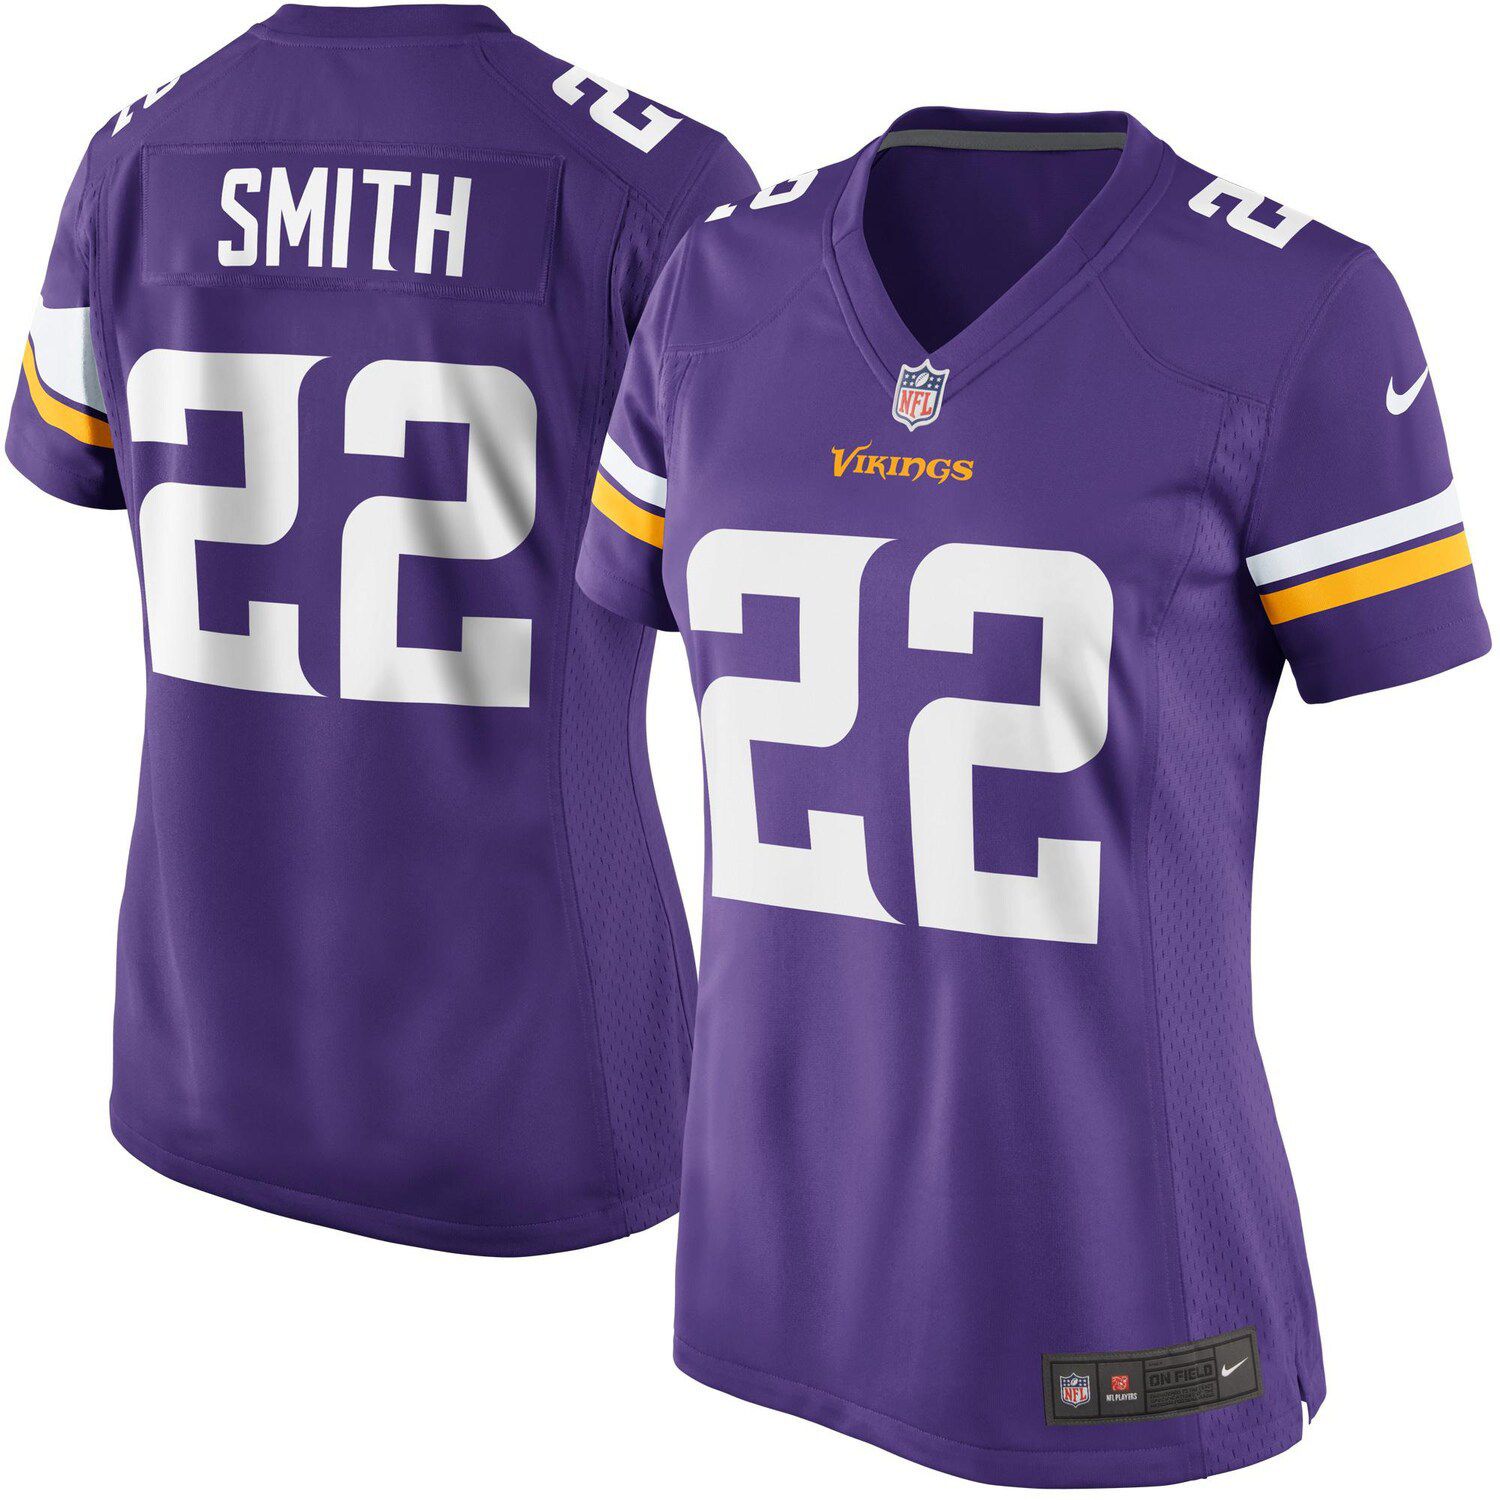 chad greenway limited jersey